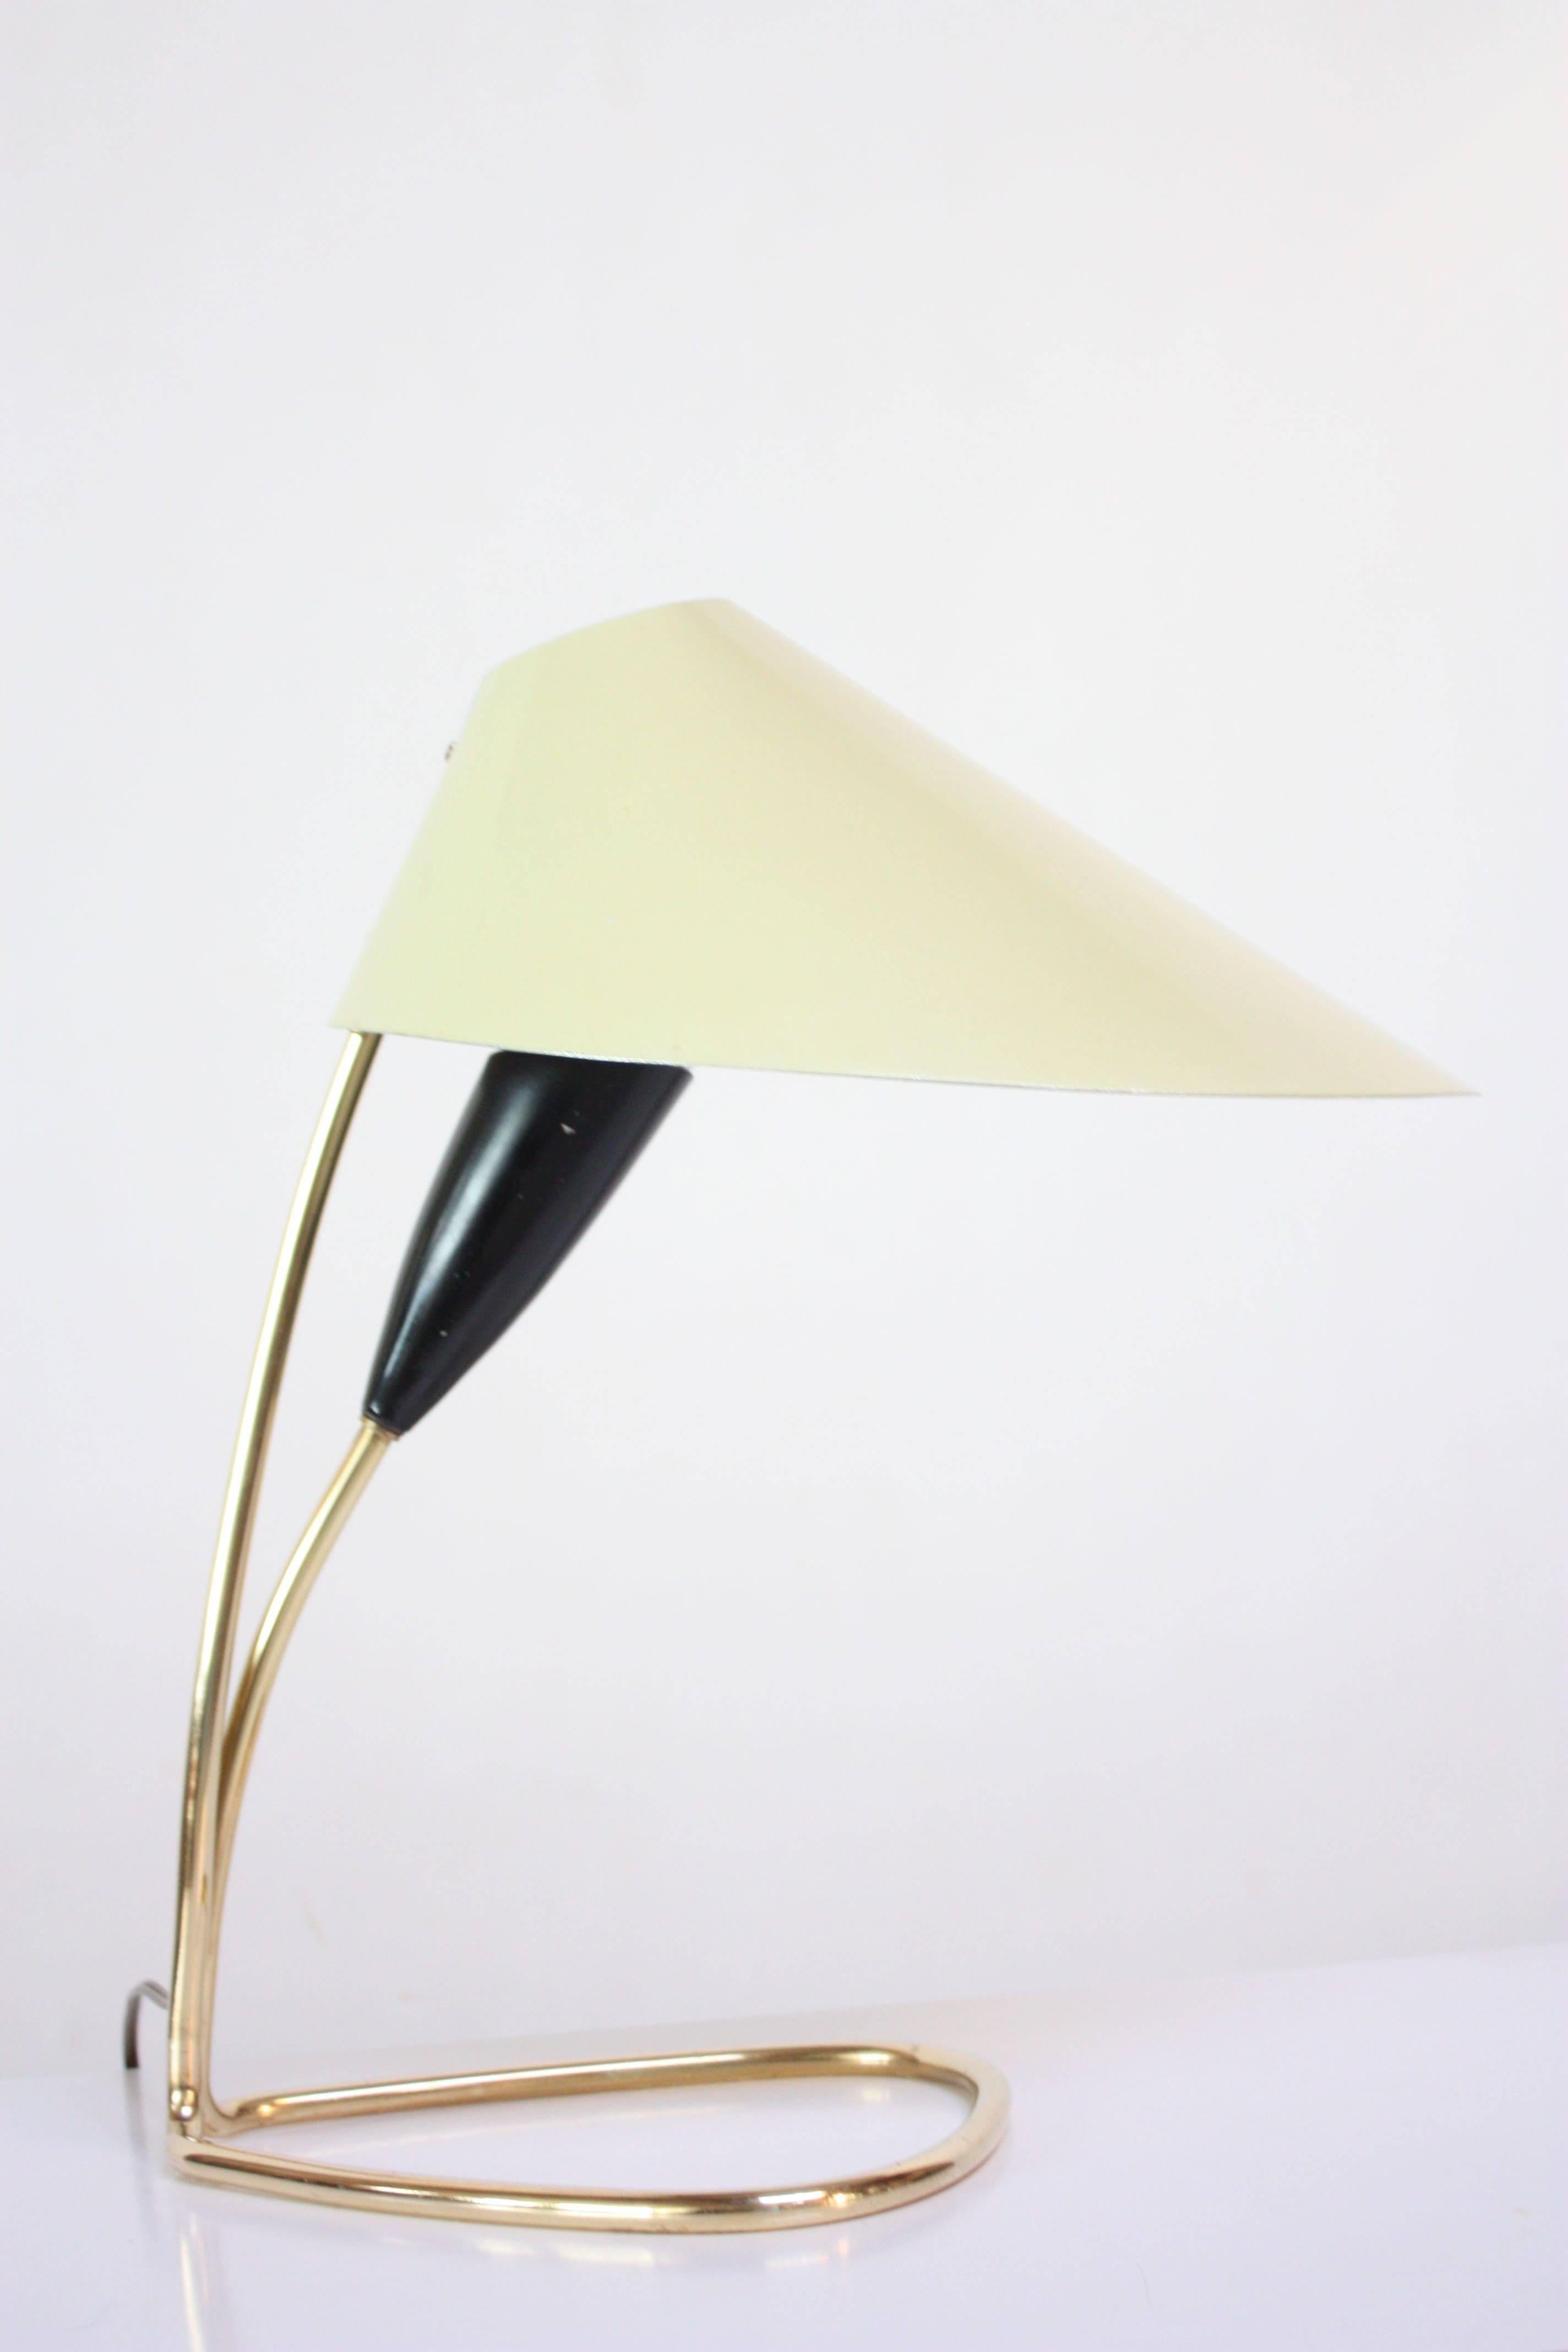 Mid-20th century table lamp composed of a pale-yellow, oversized shade (resembling a lily petal) with an interior black metal socket and tubular brass base / brass hardware. Simple, yet stunning piece attributed to J.T. Kalmar of Austria.
Painted